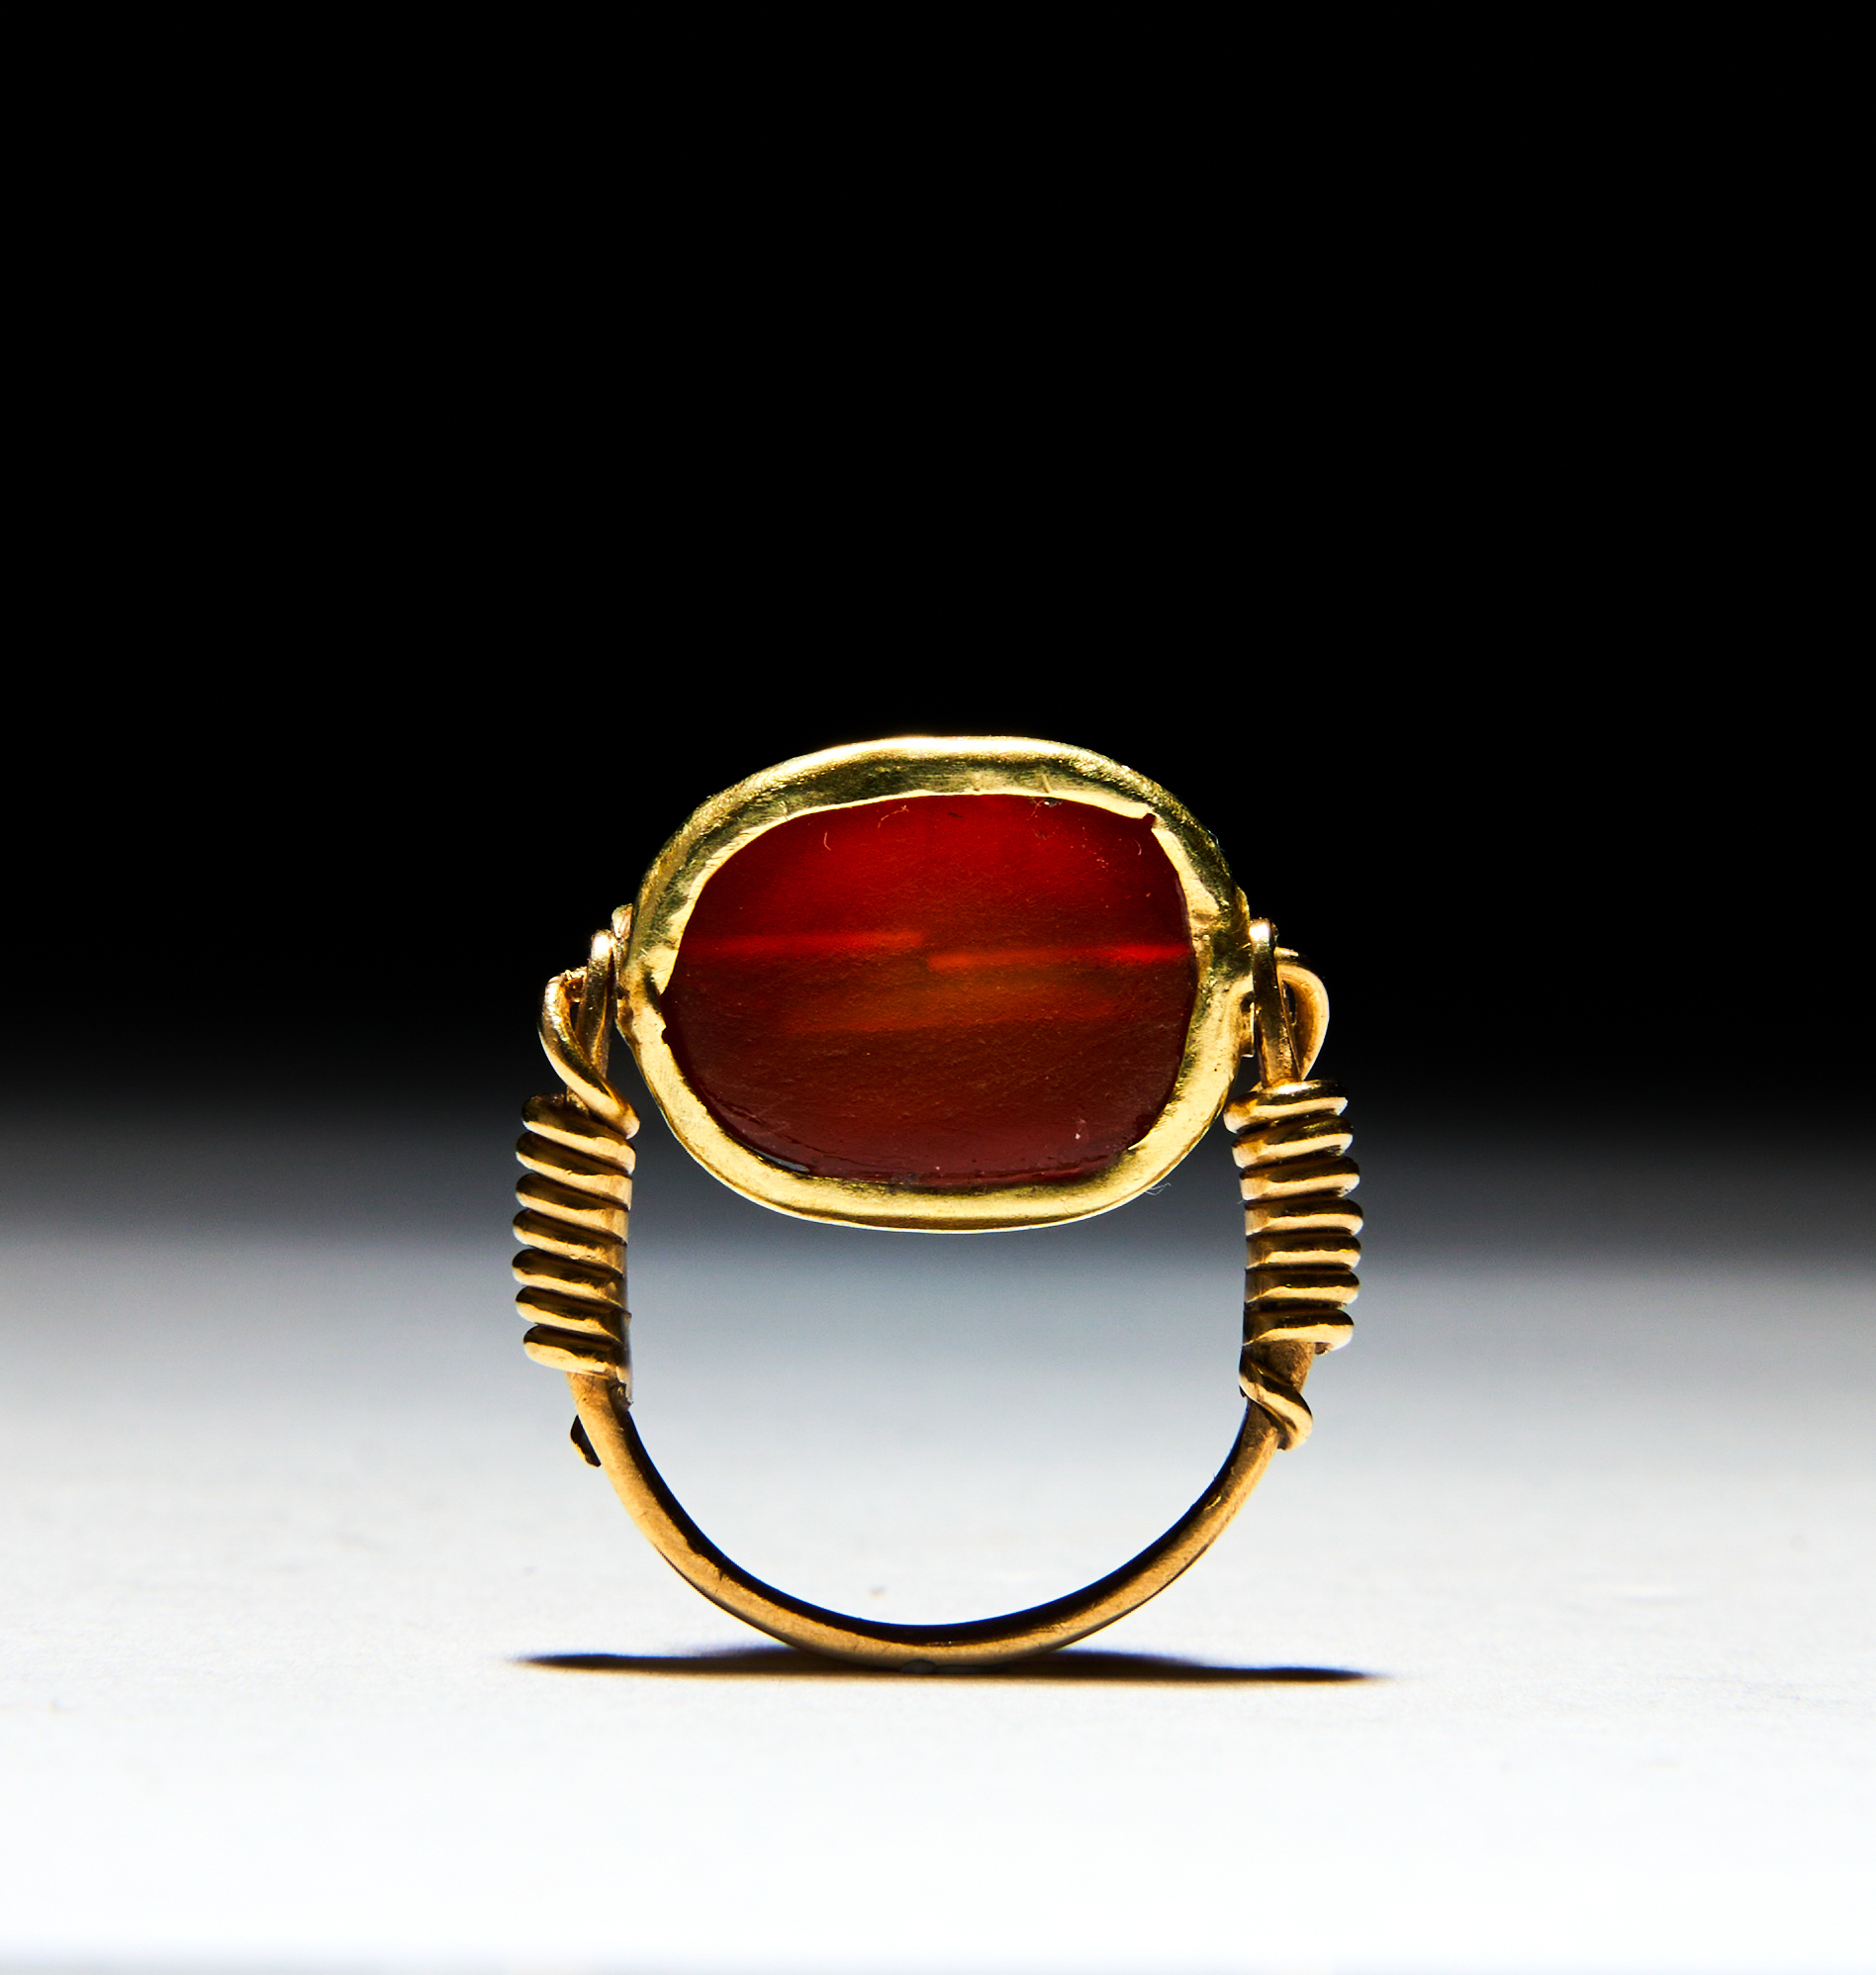 AN EAST GREEK GOLD AND CARNELIAN SCARAB FINGER RING ARCHAIC PERIOD, CIRCA LATE 6TH CENTURY B.C. - Image 2 of 2